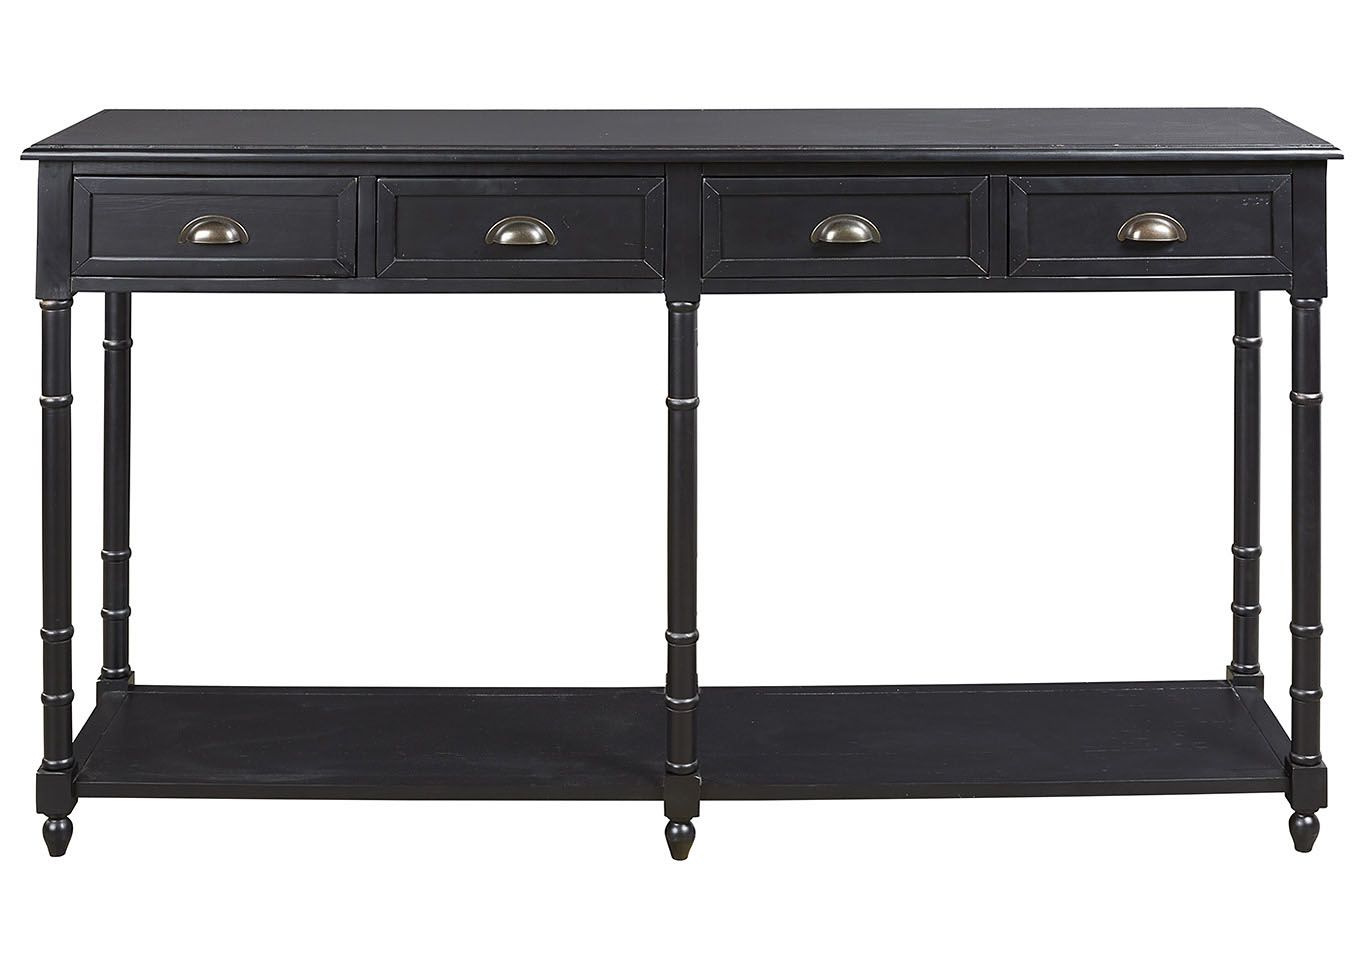 Eirdale Black Console Sofa Table Roses Flooring And Furniture Intended For Black Console Tables (View 10 of 20)